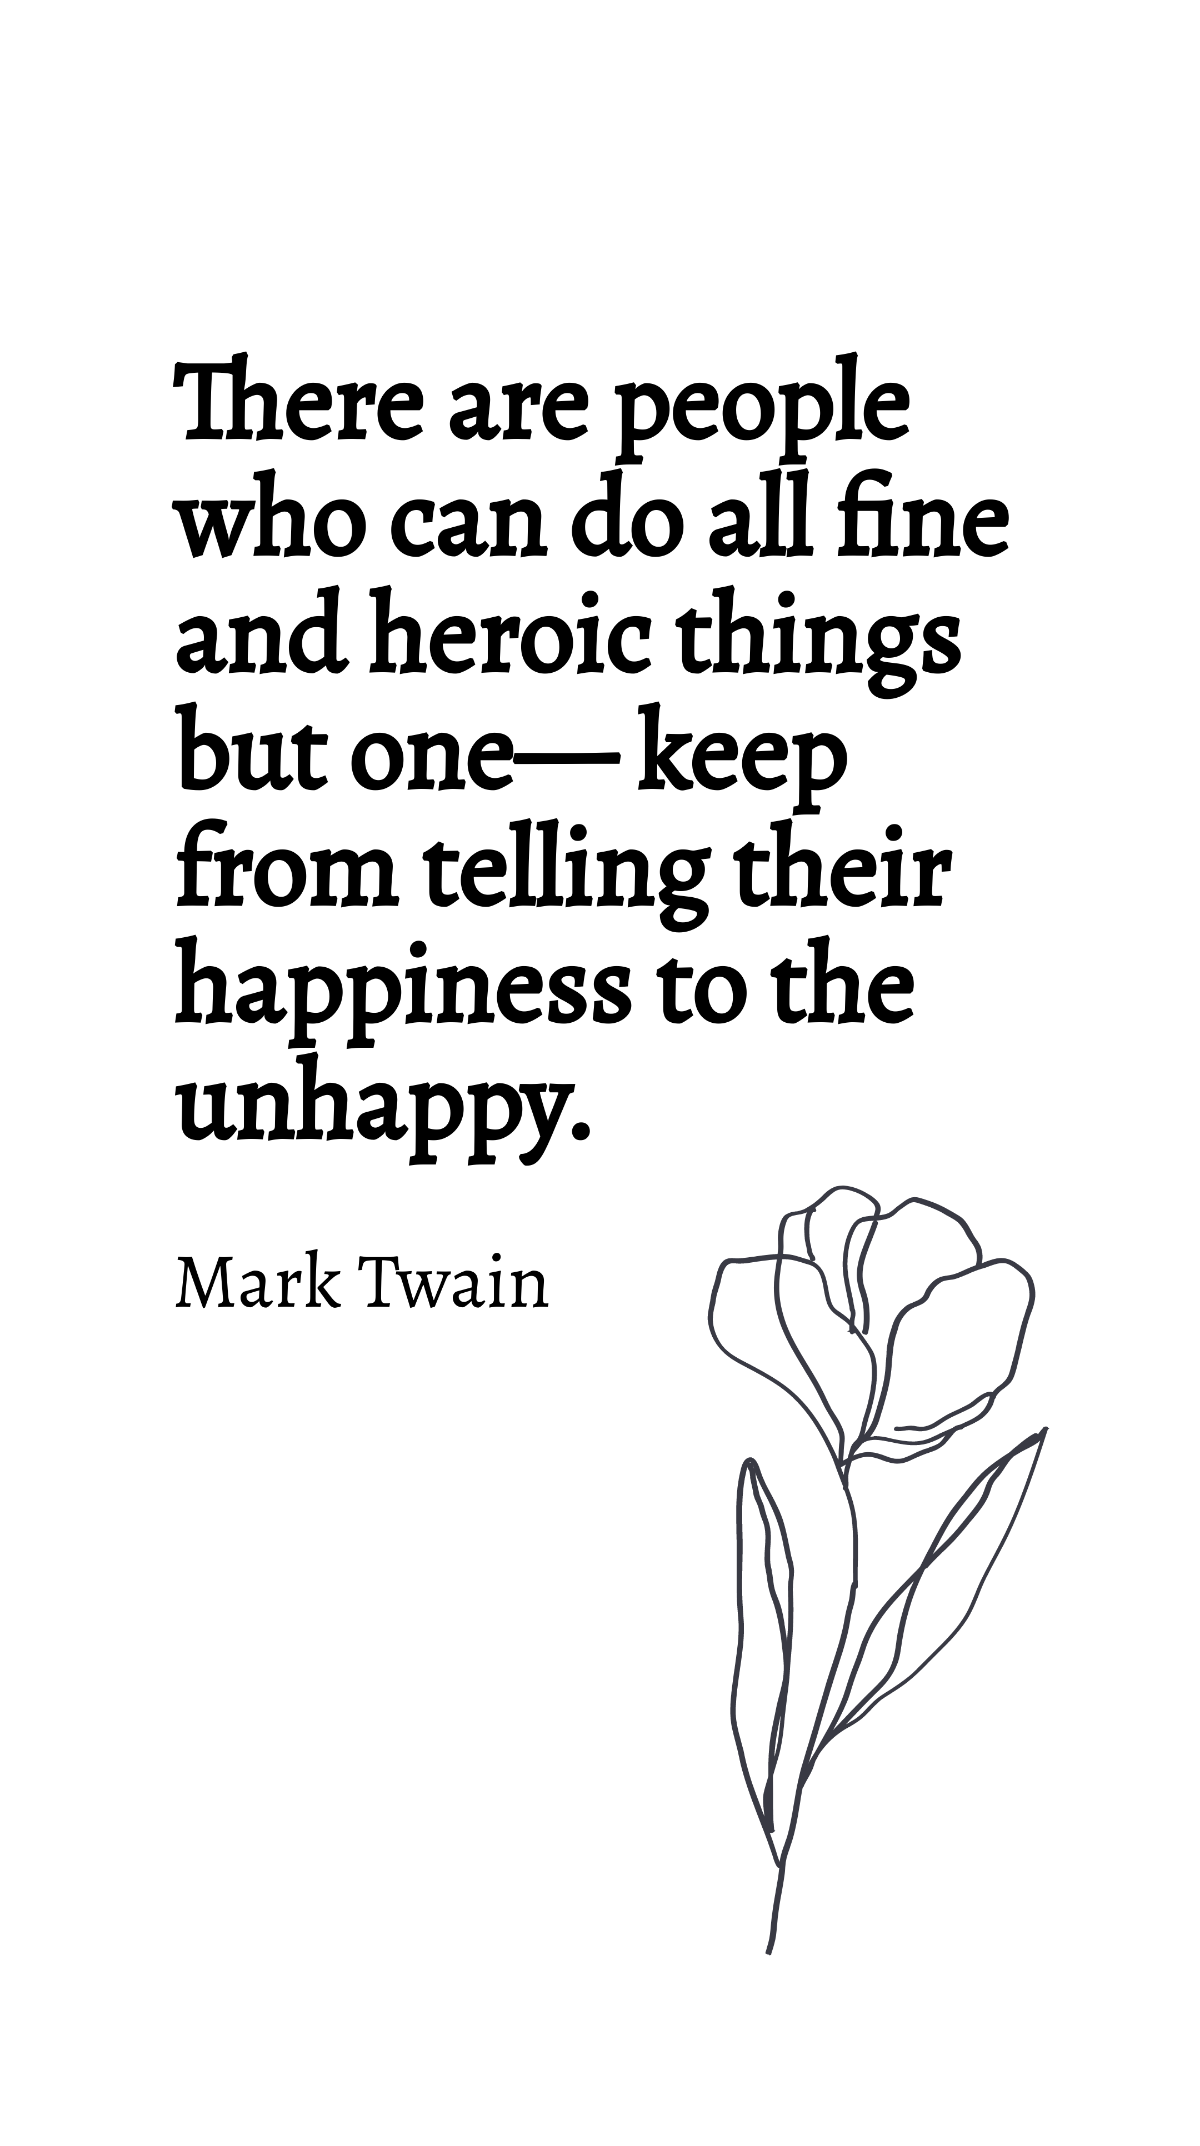 Mark Twain - There are people who can do all fine and heroic things but one - keep from telling their happiness to the unhappy. Template